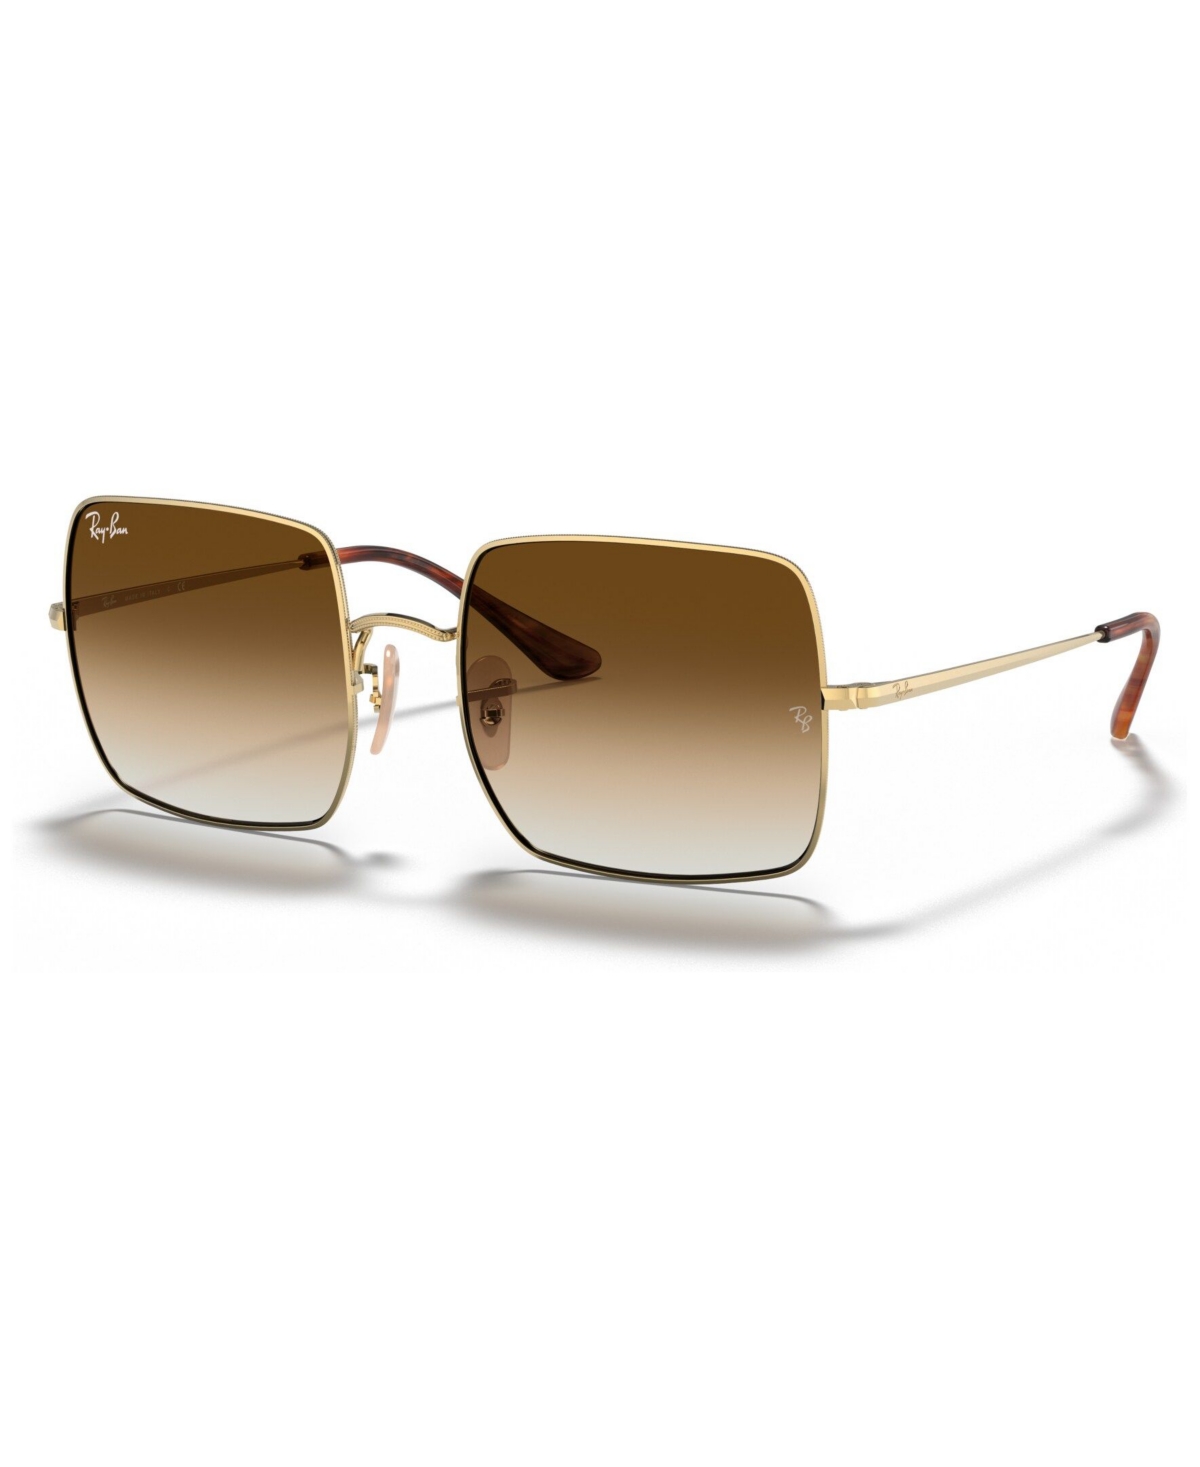 Ray Ban Unisex Sunglasses, Rb1971 In Gold,clear Gradient Brown